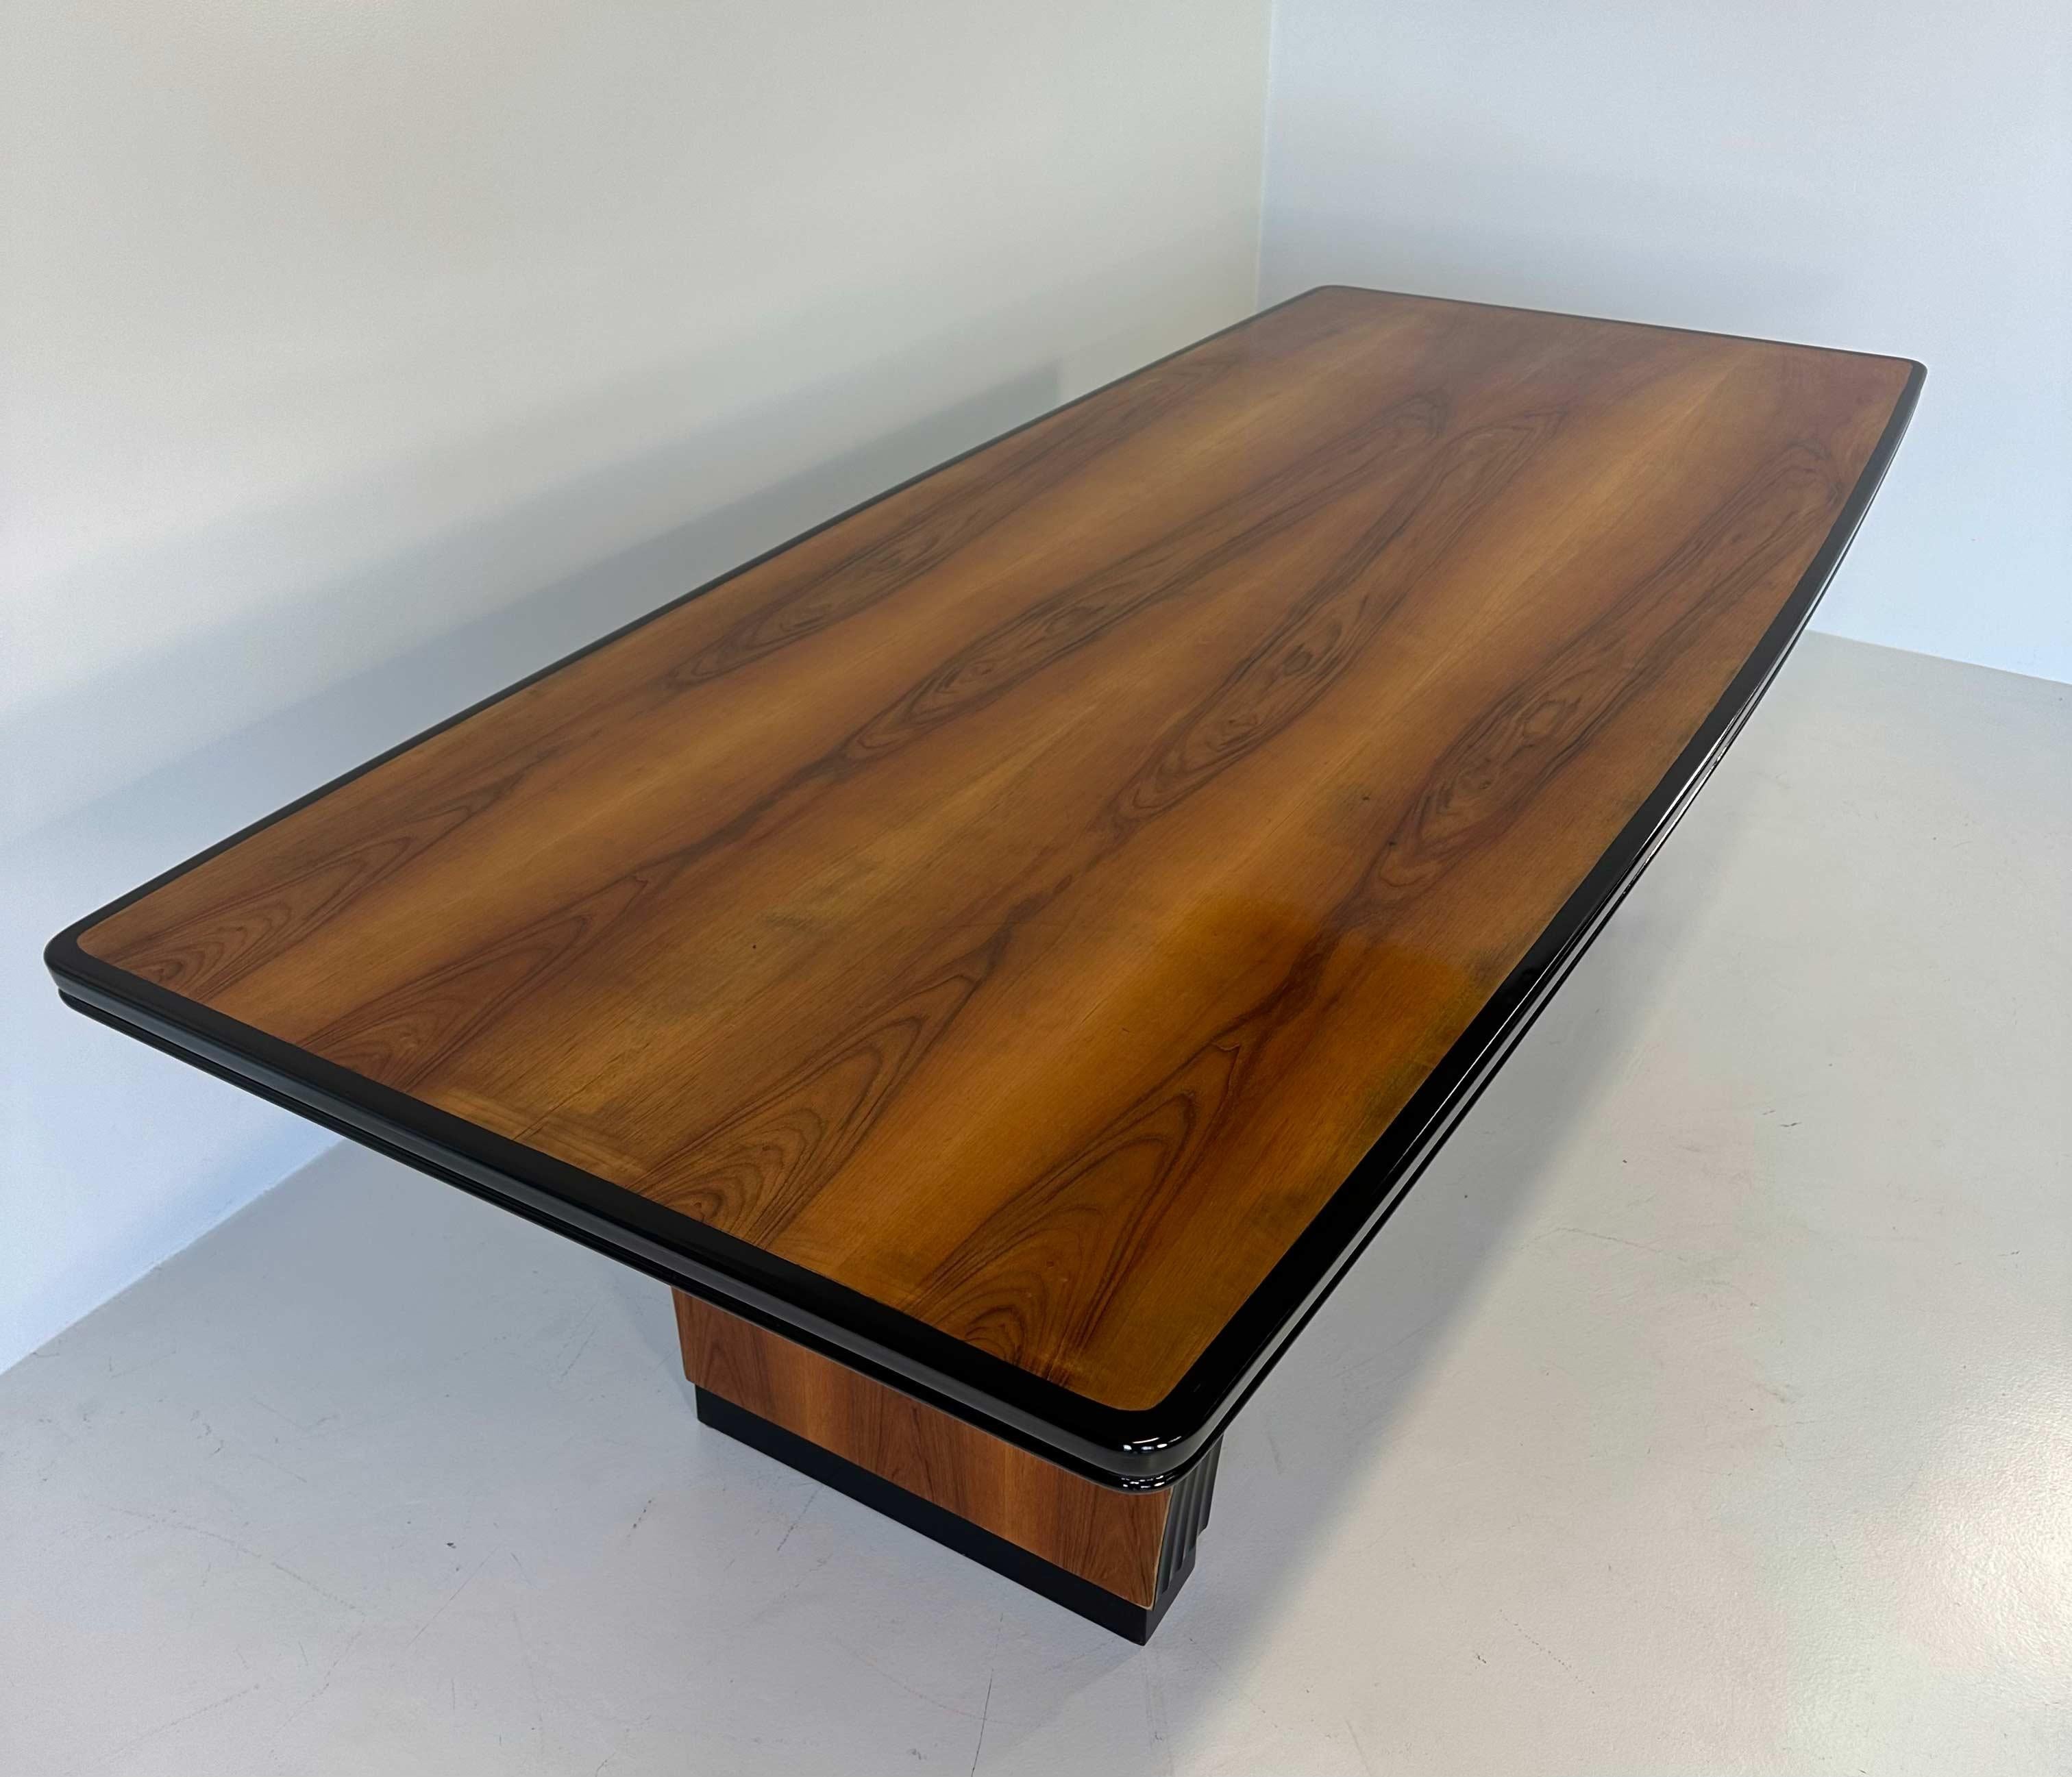 Italian Art Deco Walnut and Black Lacquer Table, 1930s For Sale 2